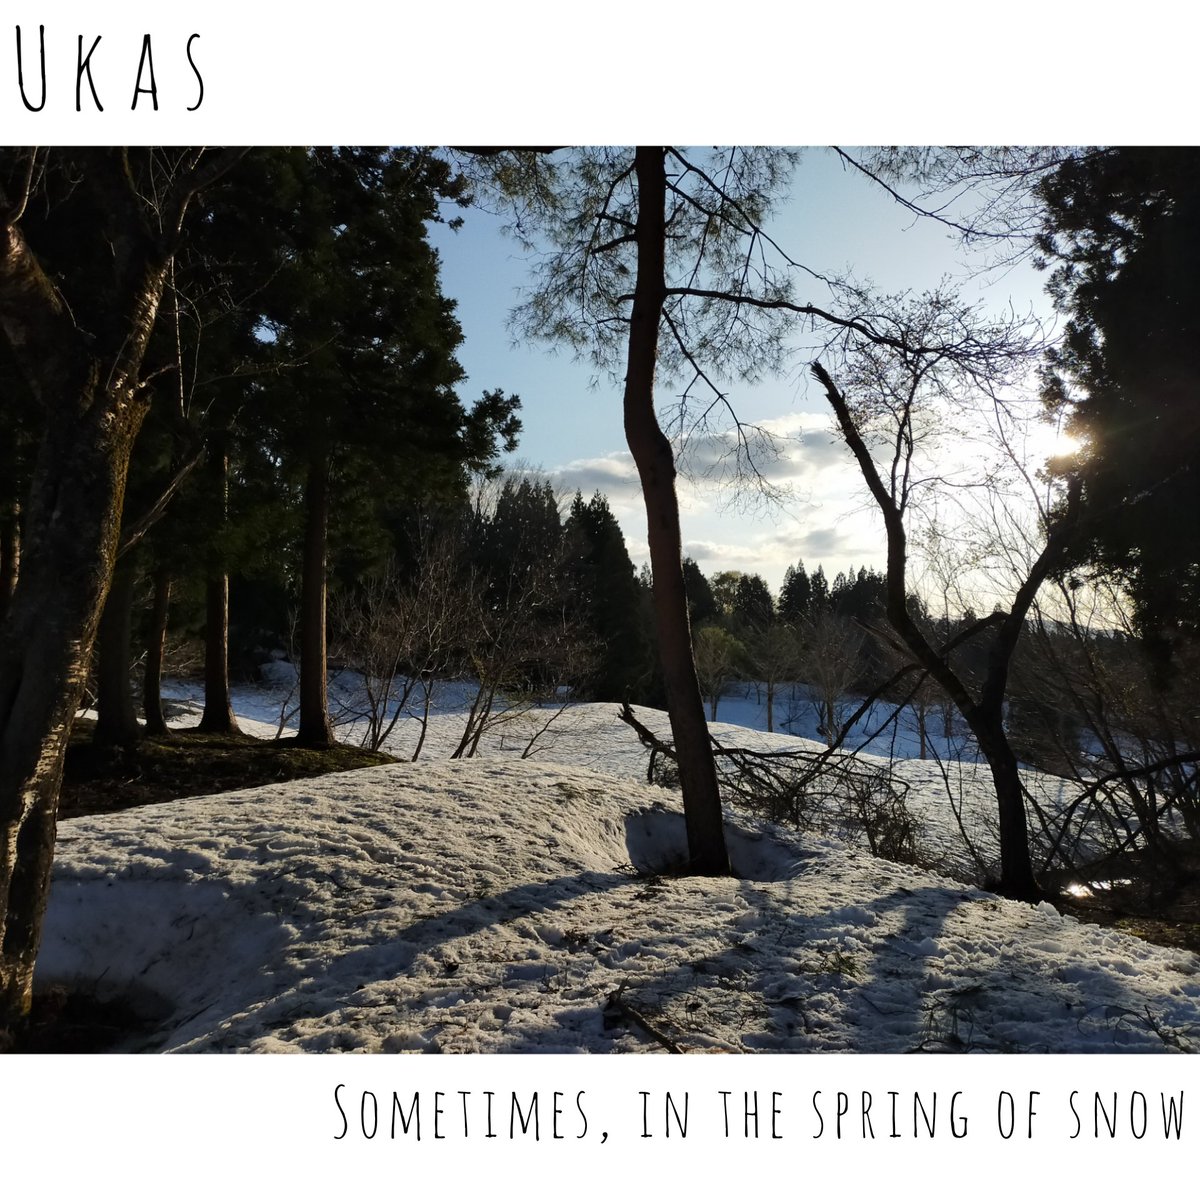 Ukas - Sometimes, in the Spring of Snow EP